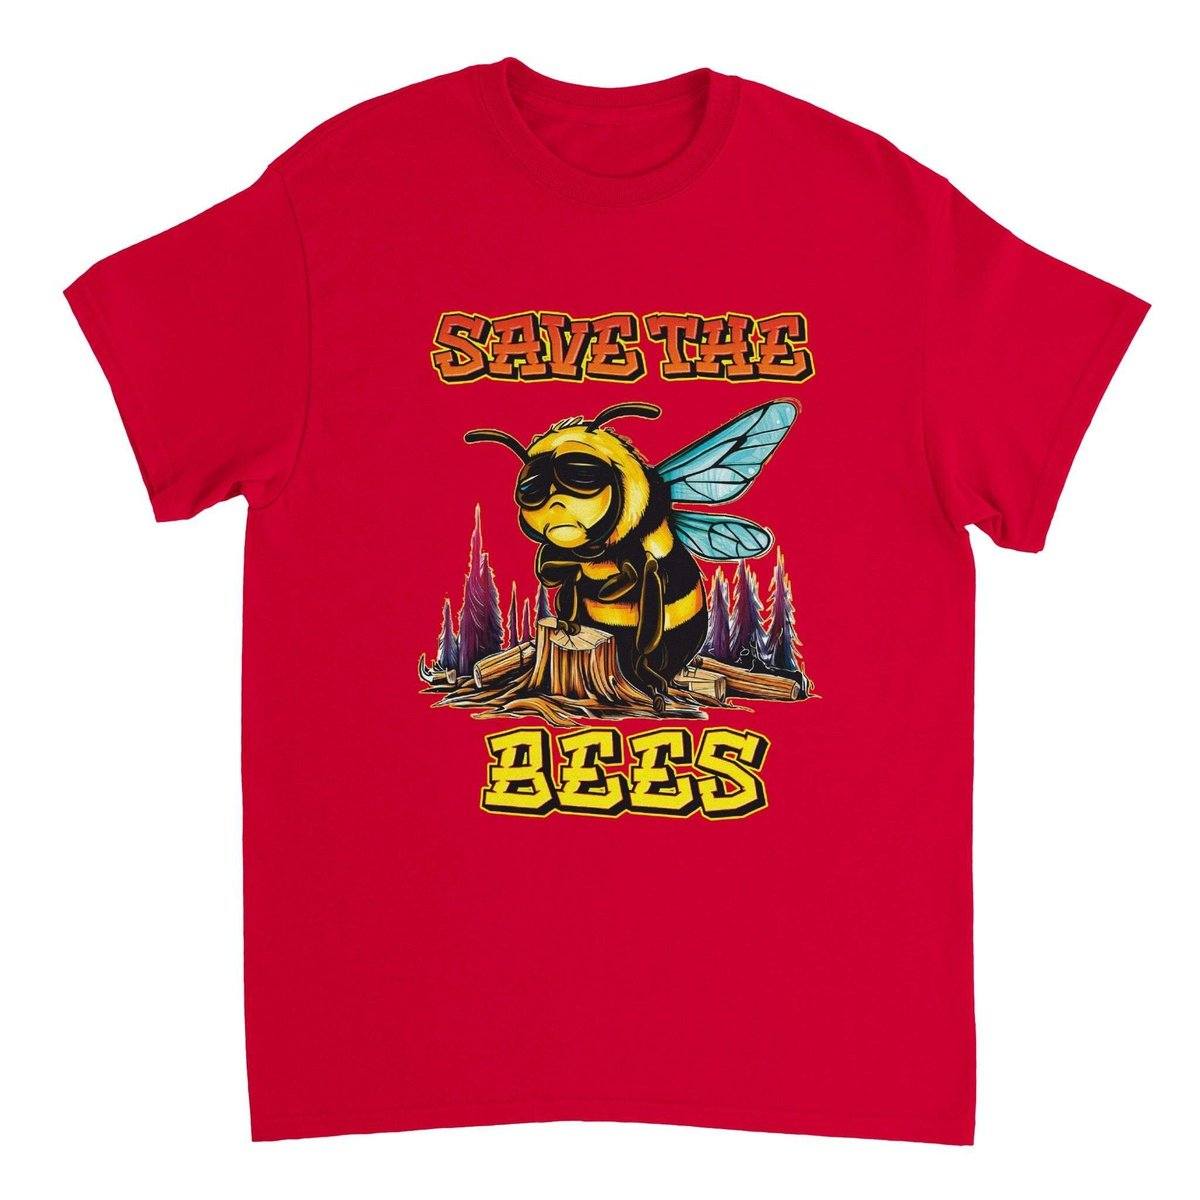 Save The Bees Tshirt - Crying Bee - Unisex Crewneck T-shirt Australia Online Color Red / S